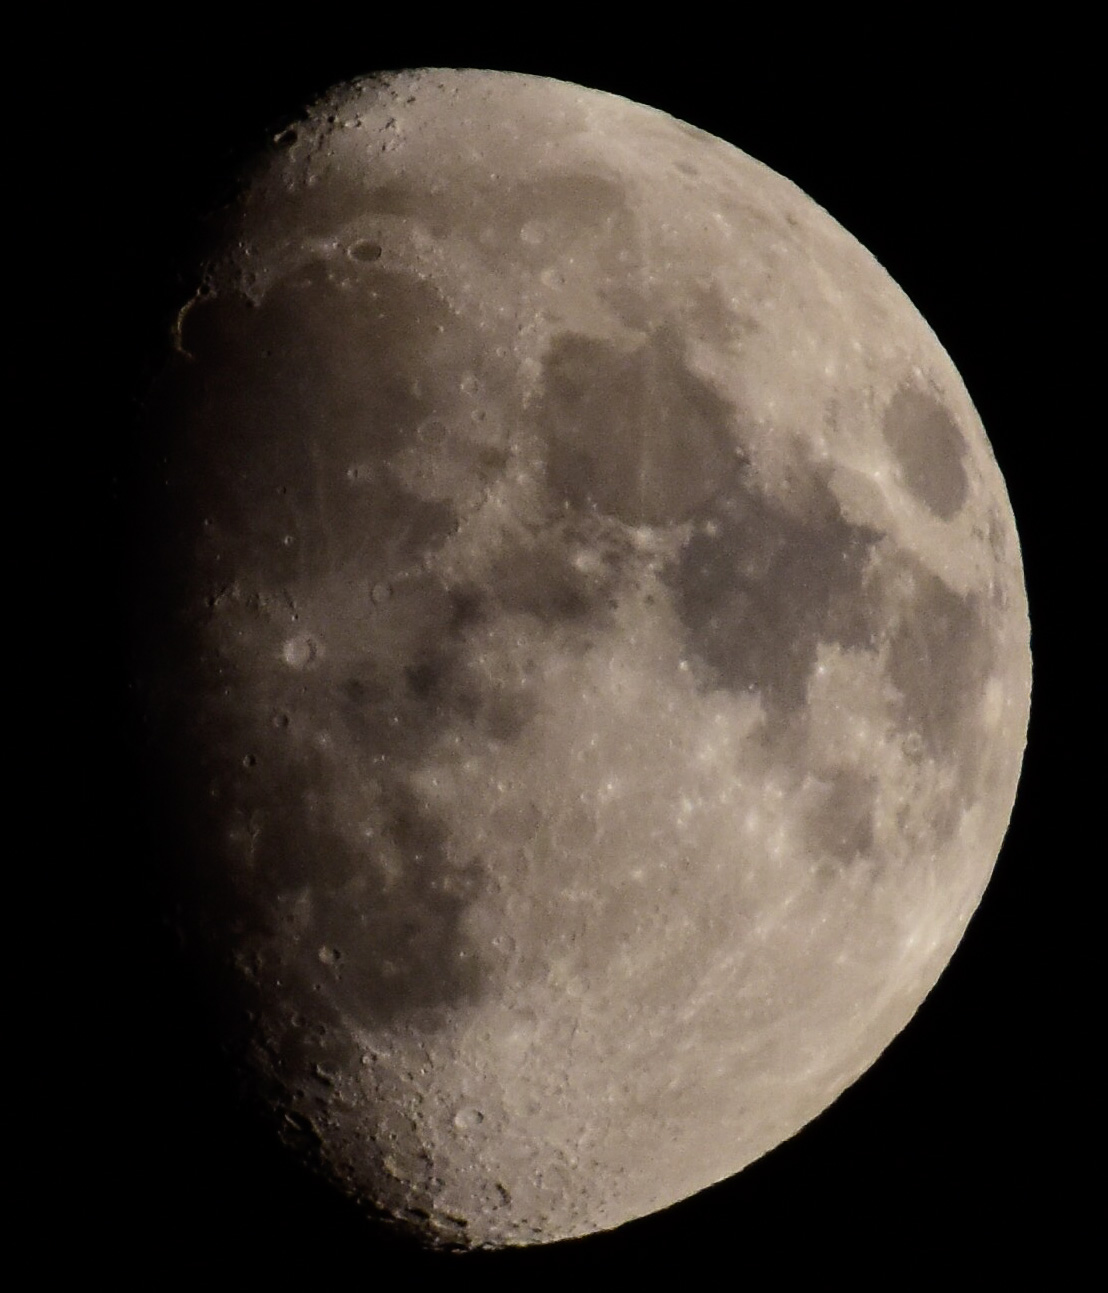 The First Quarter (Waxing Gibbous) Moon